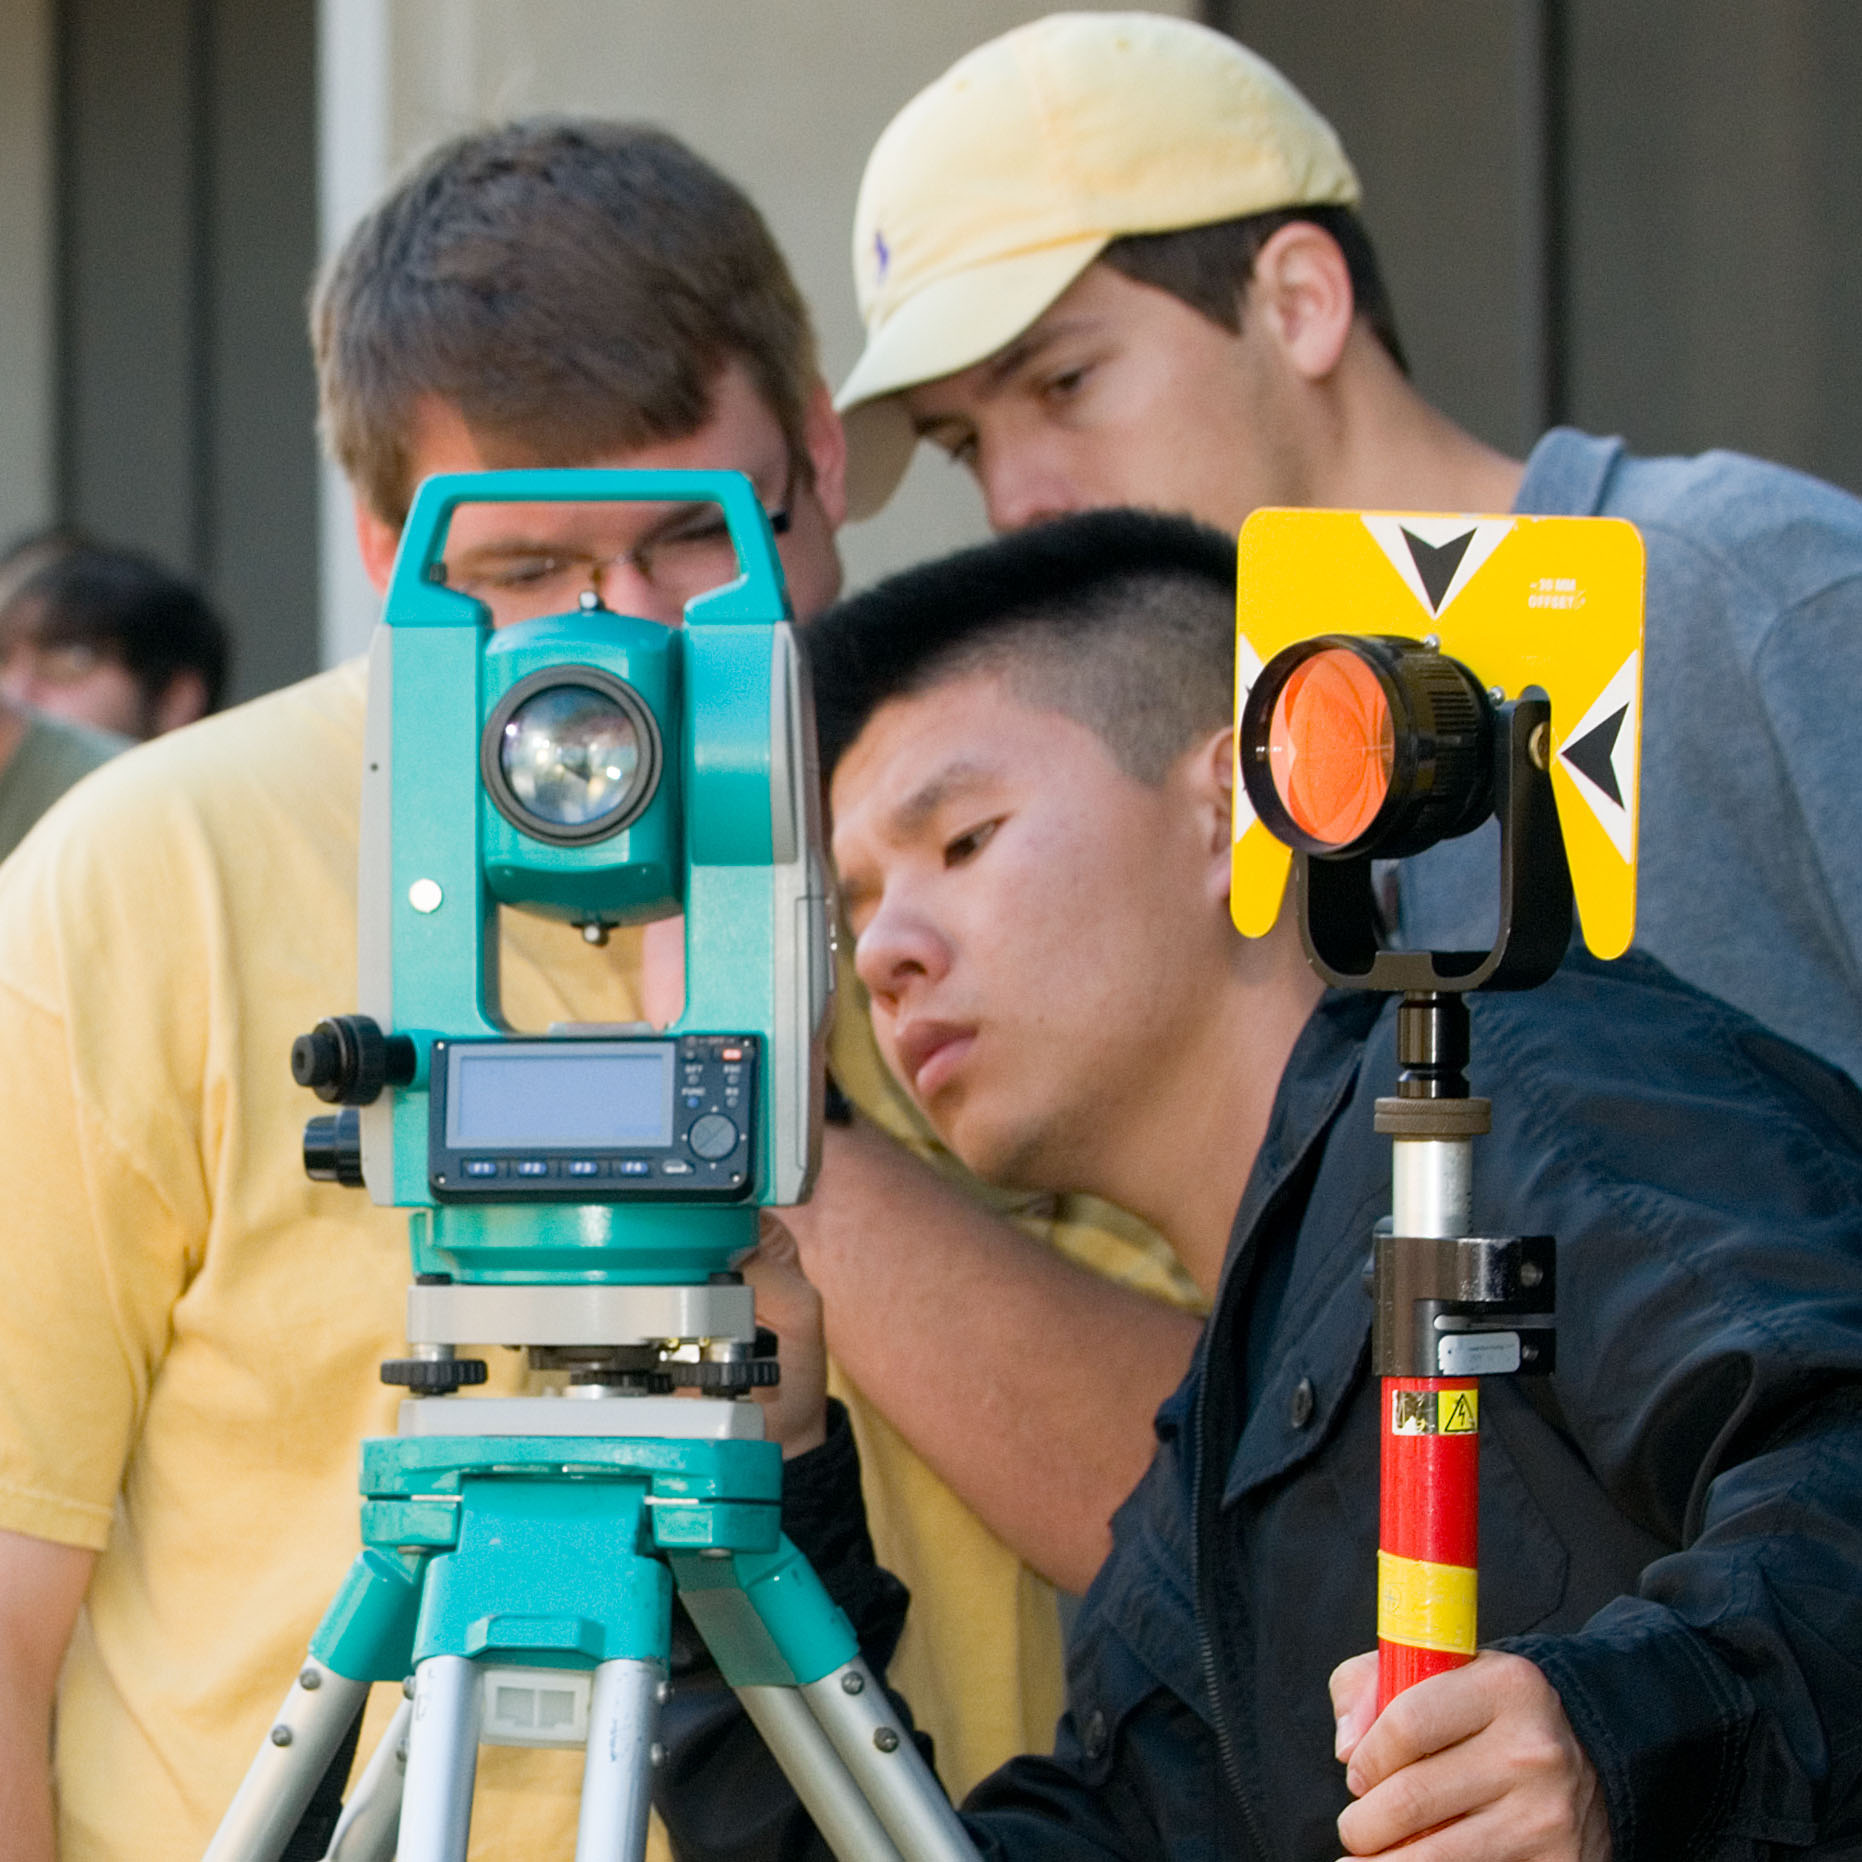 Students learn surveying